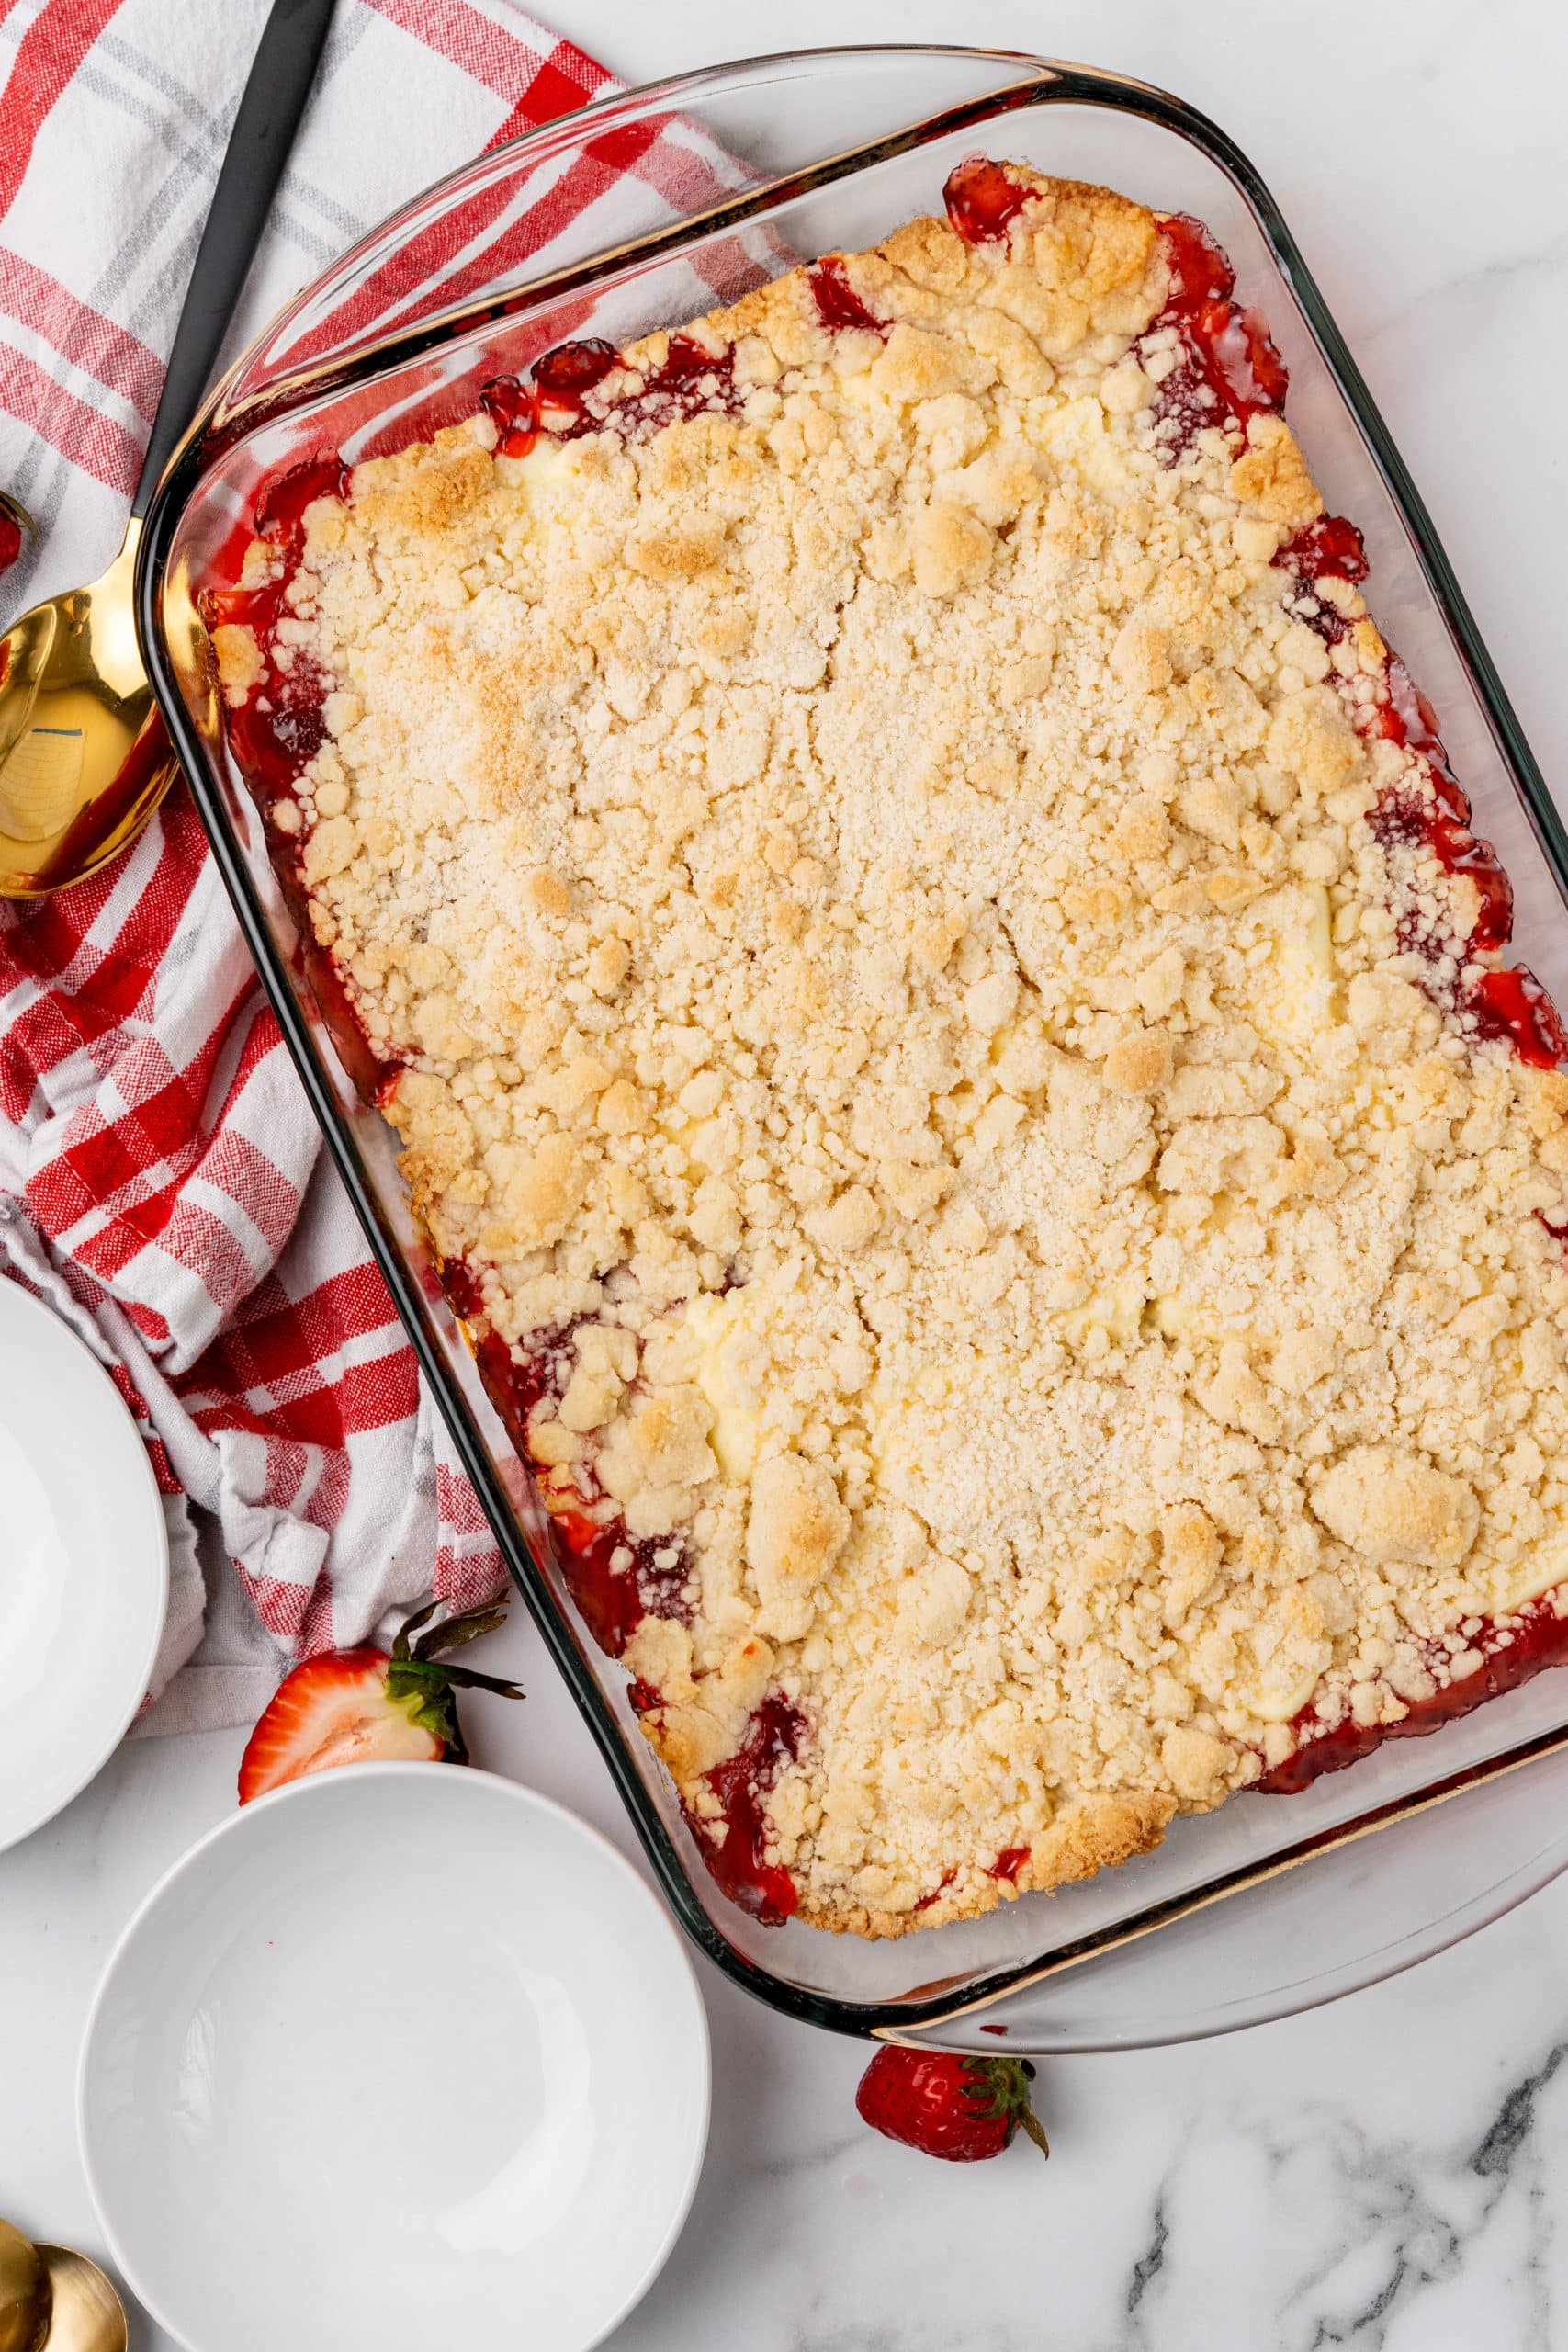 a strawberry cheesecake dump cake in a glass baking dish with white dessert plates on the side